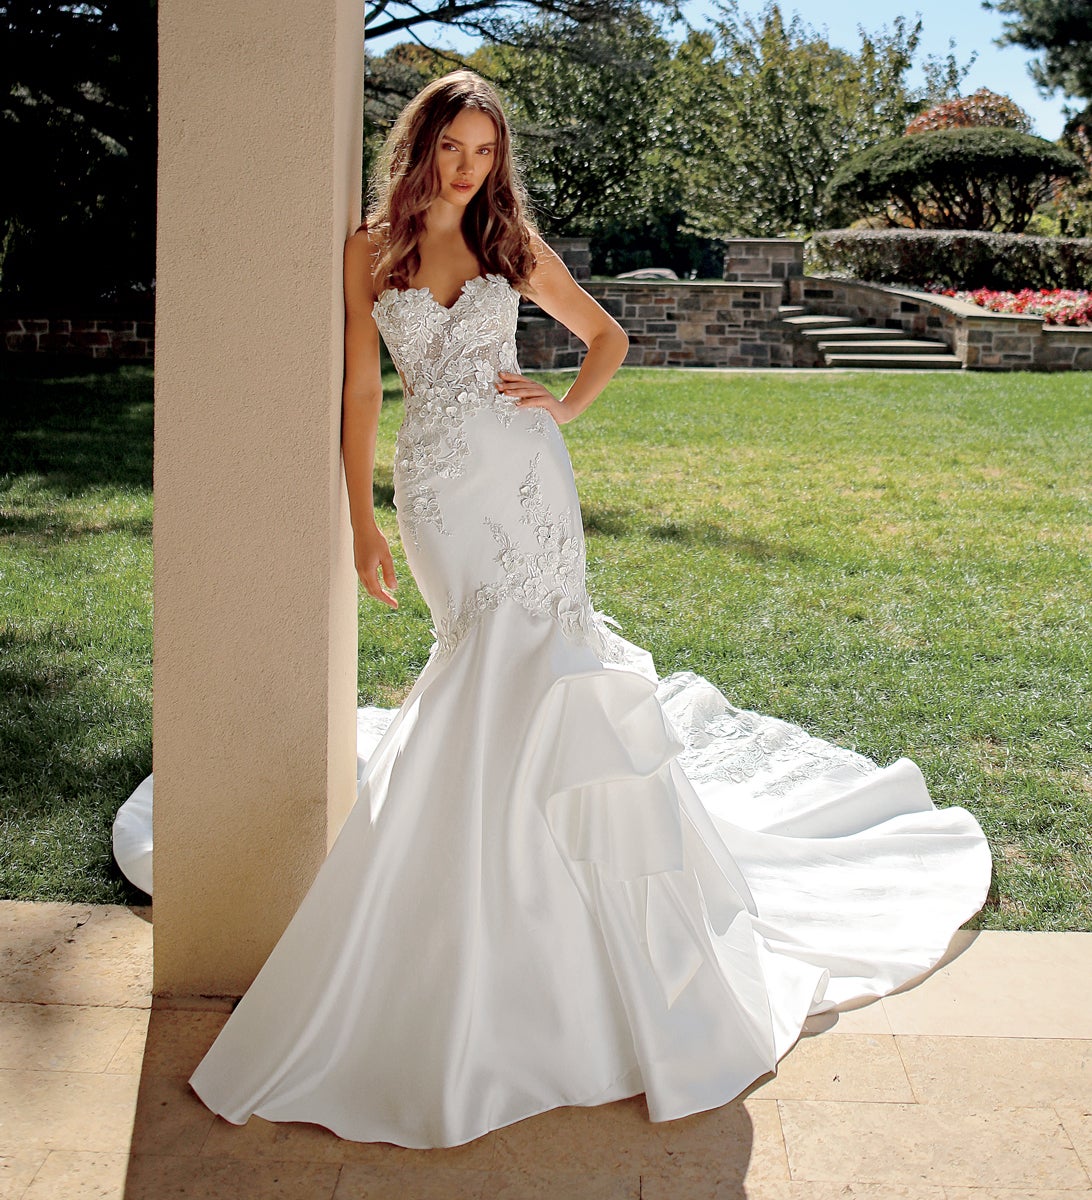 Strapless Ball Gown Wedding Dress With Beaded Corset Bodice